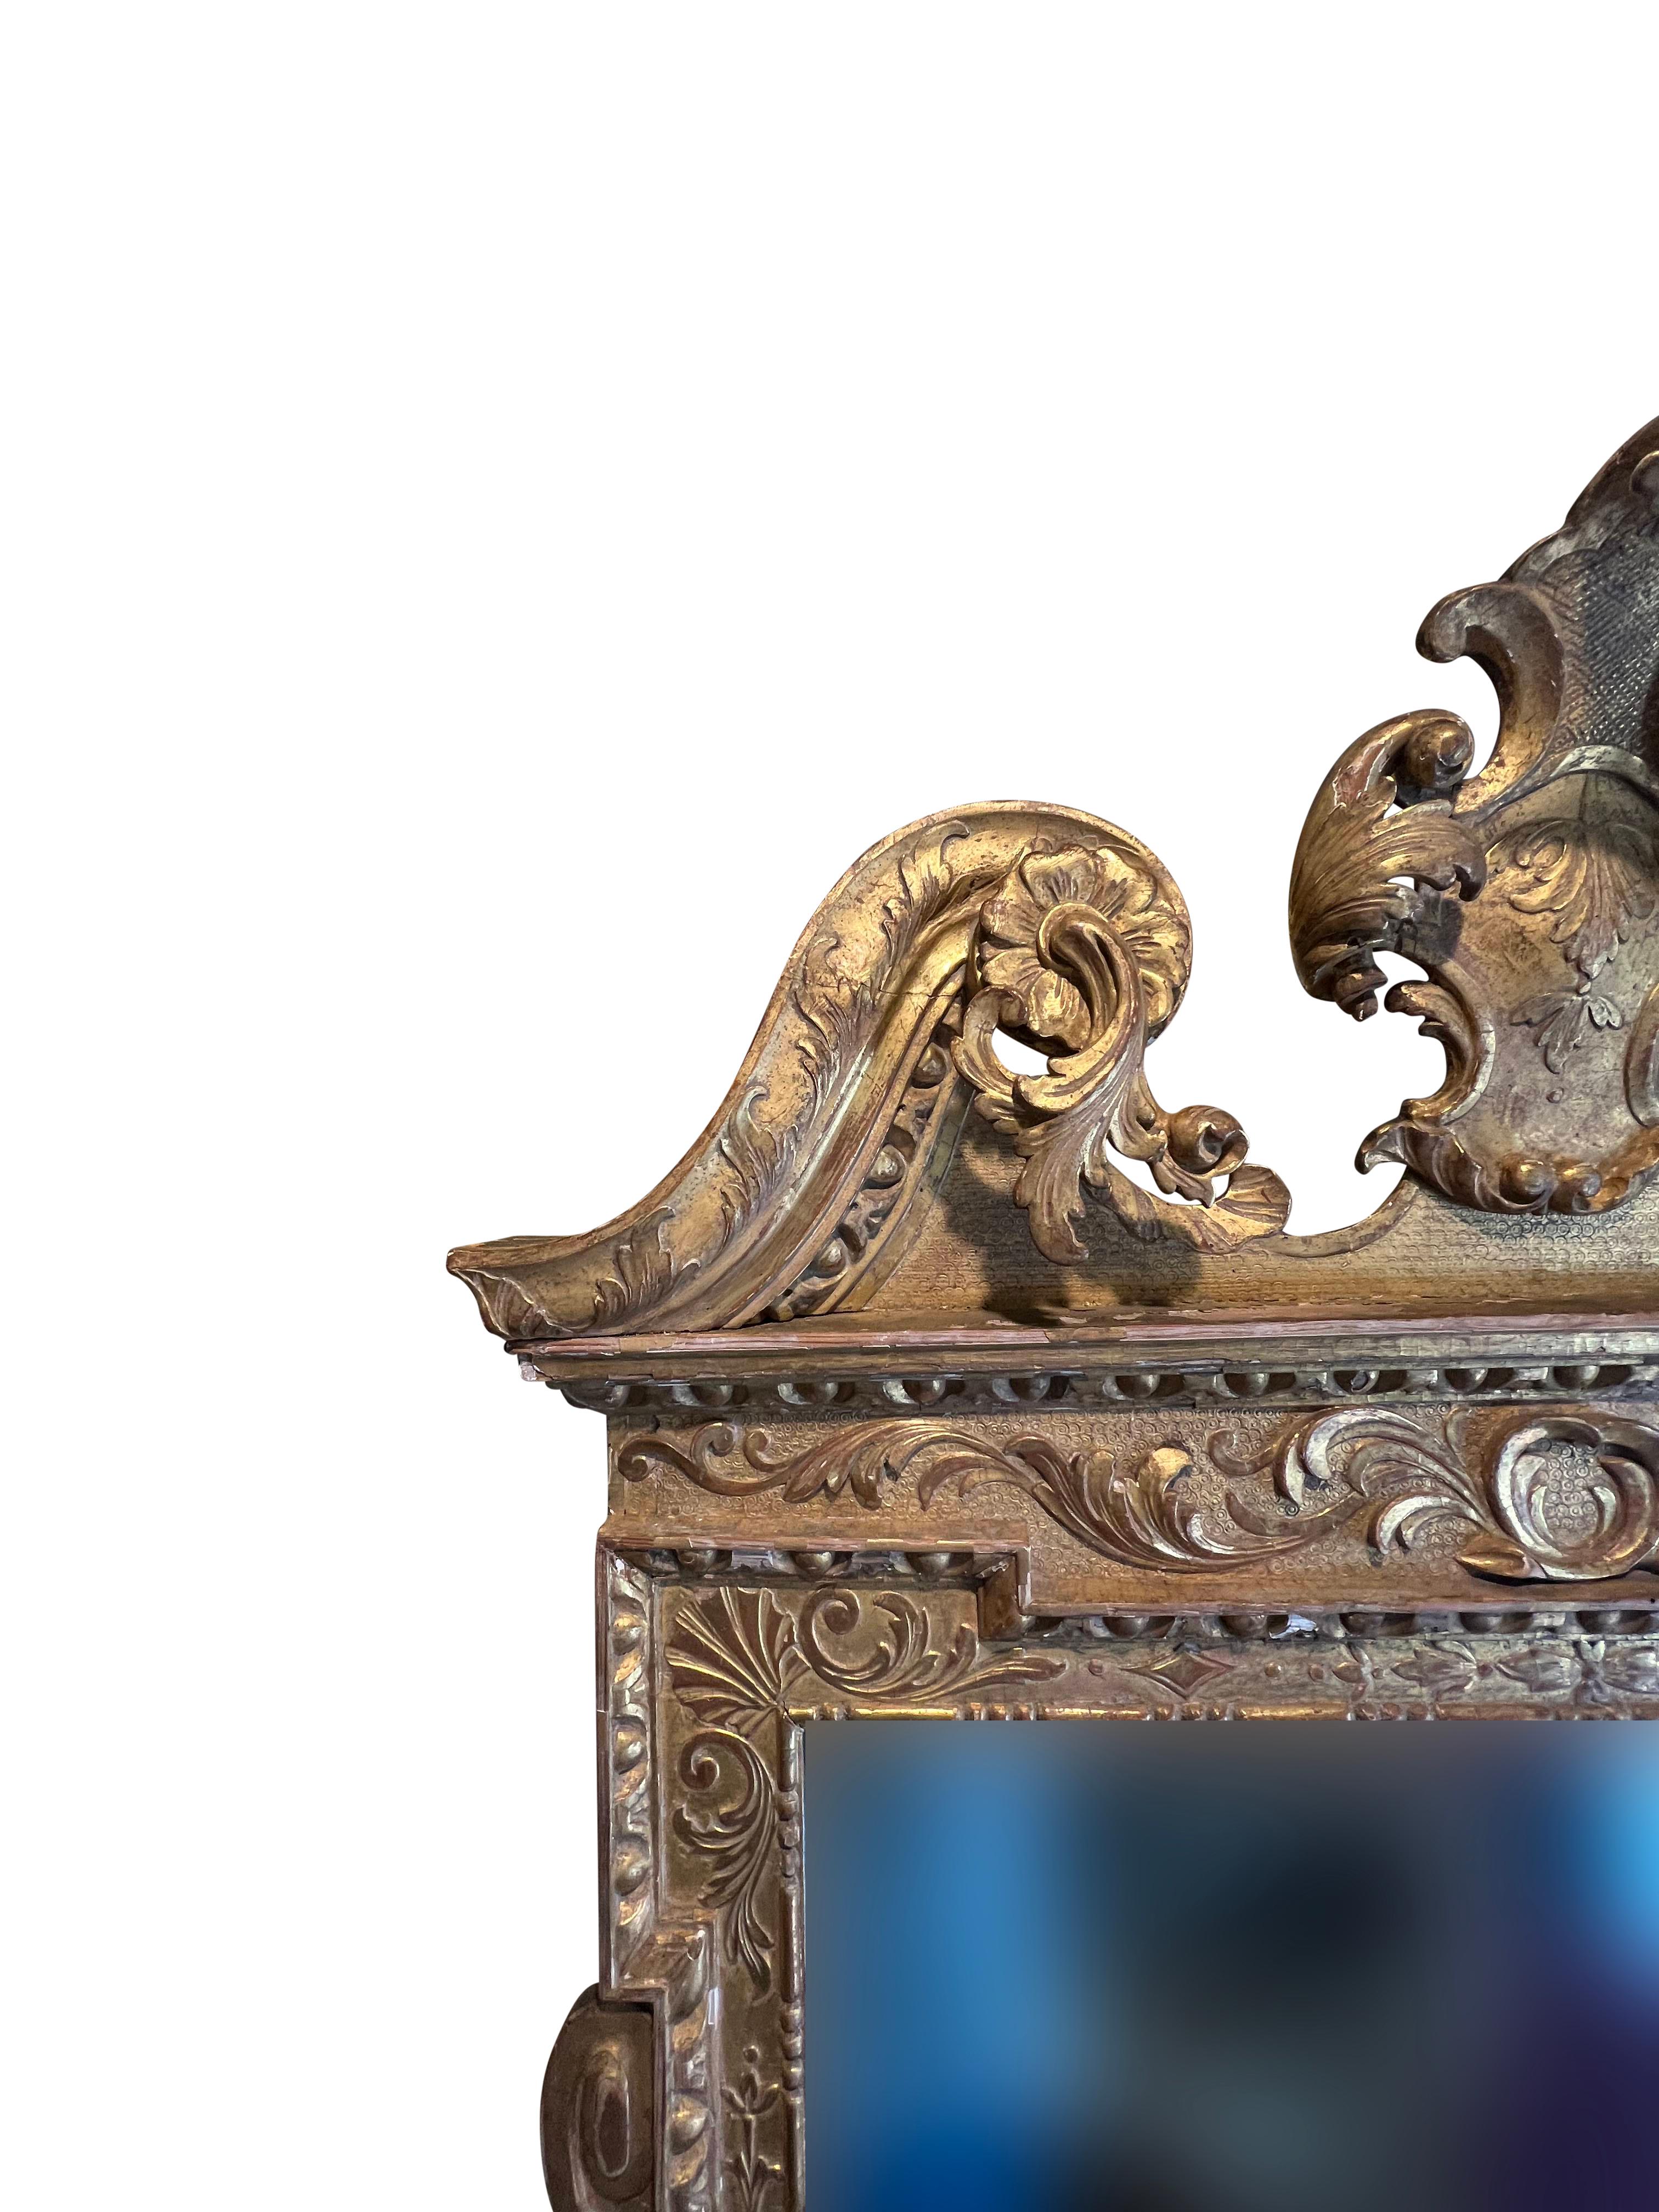 With central carved cartouche within a scrolled arched pediment over a mirror plate set in an egg and dart and bead and reel frame. The base of the frame with brass plates that once held candle arms.